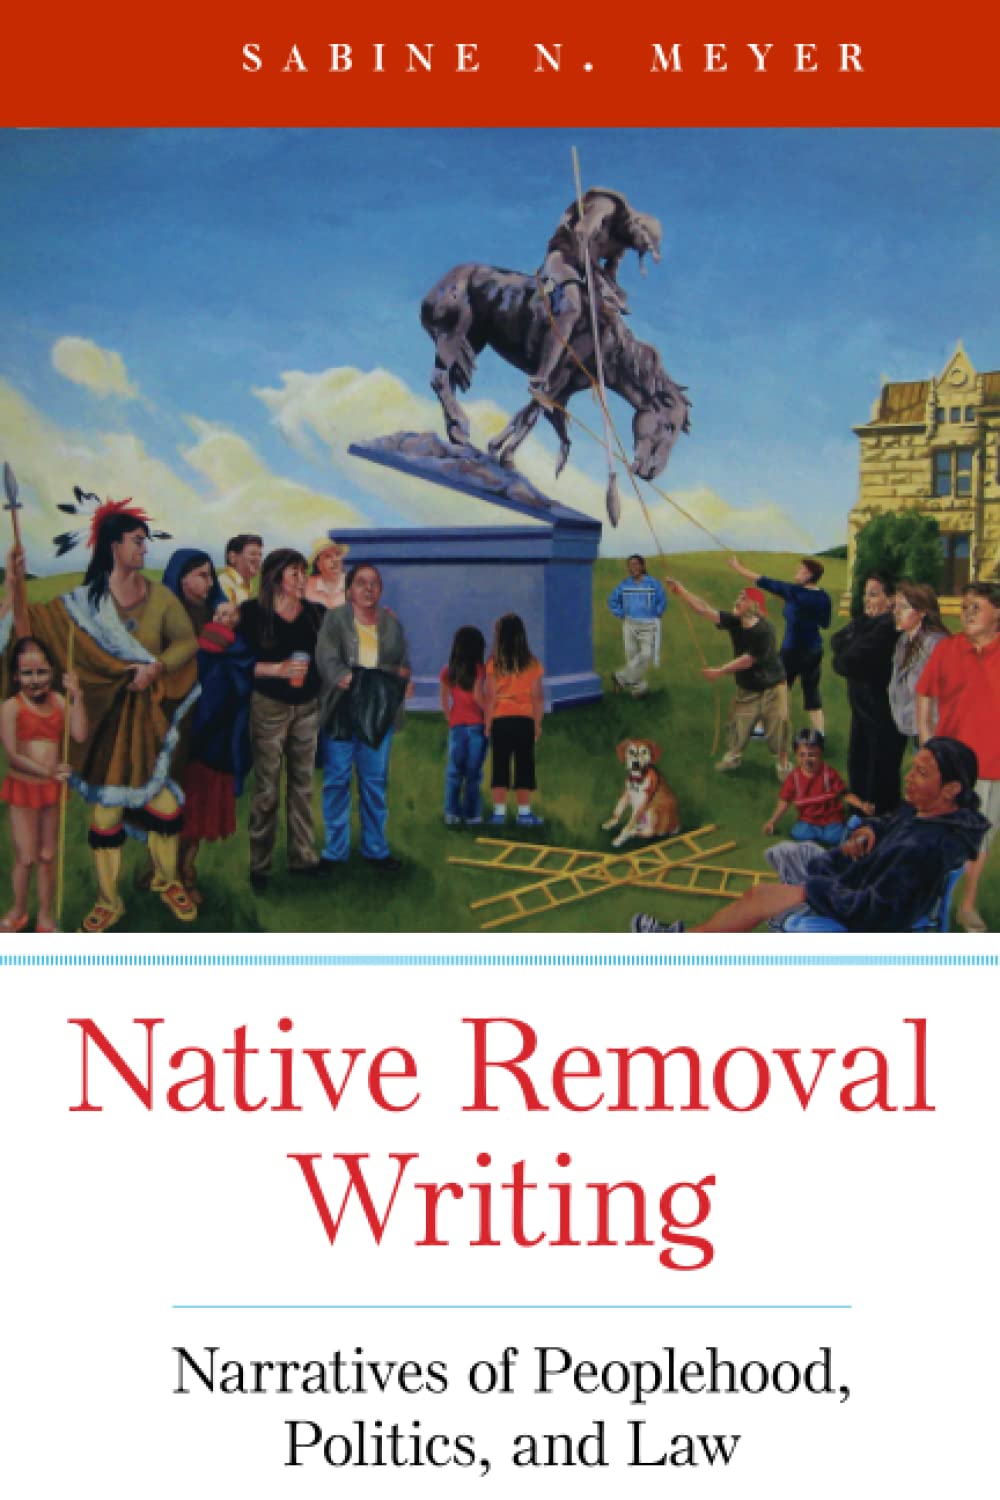 Native Removal Writing: Narratives of Peoplehood, Politics, and Law